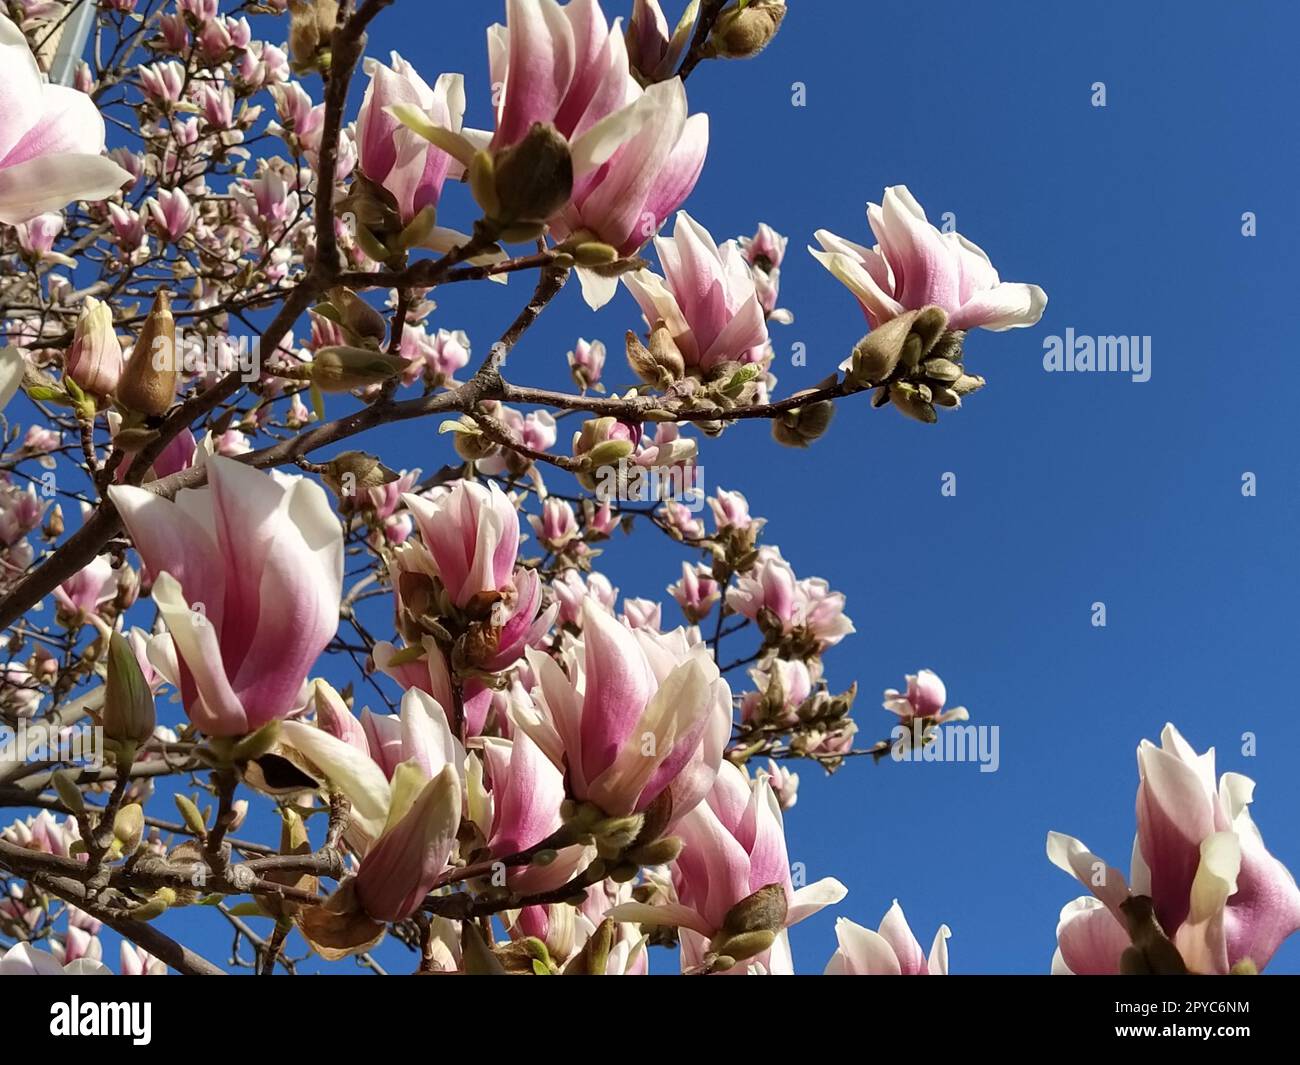 Beautiful blossoming pink flowers and magnolia buds on branches without leaves. Blue sky and sunlight. Wedding invitation or greeting card from March 8. The beginning of spring. Delicate white petals Stock Photo